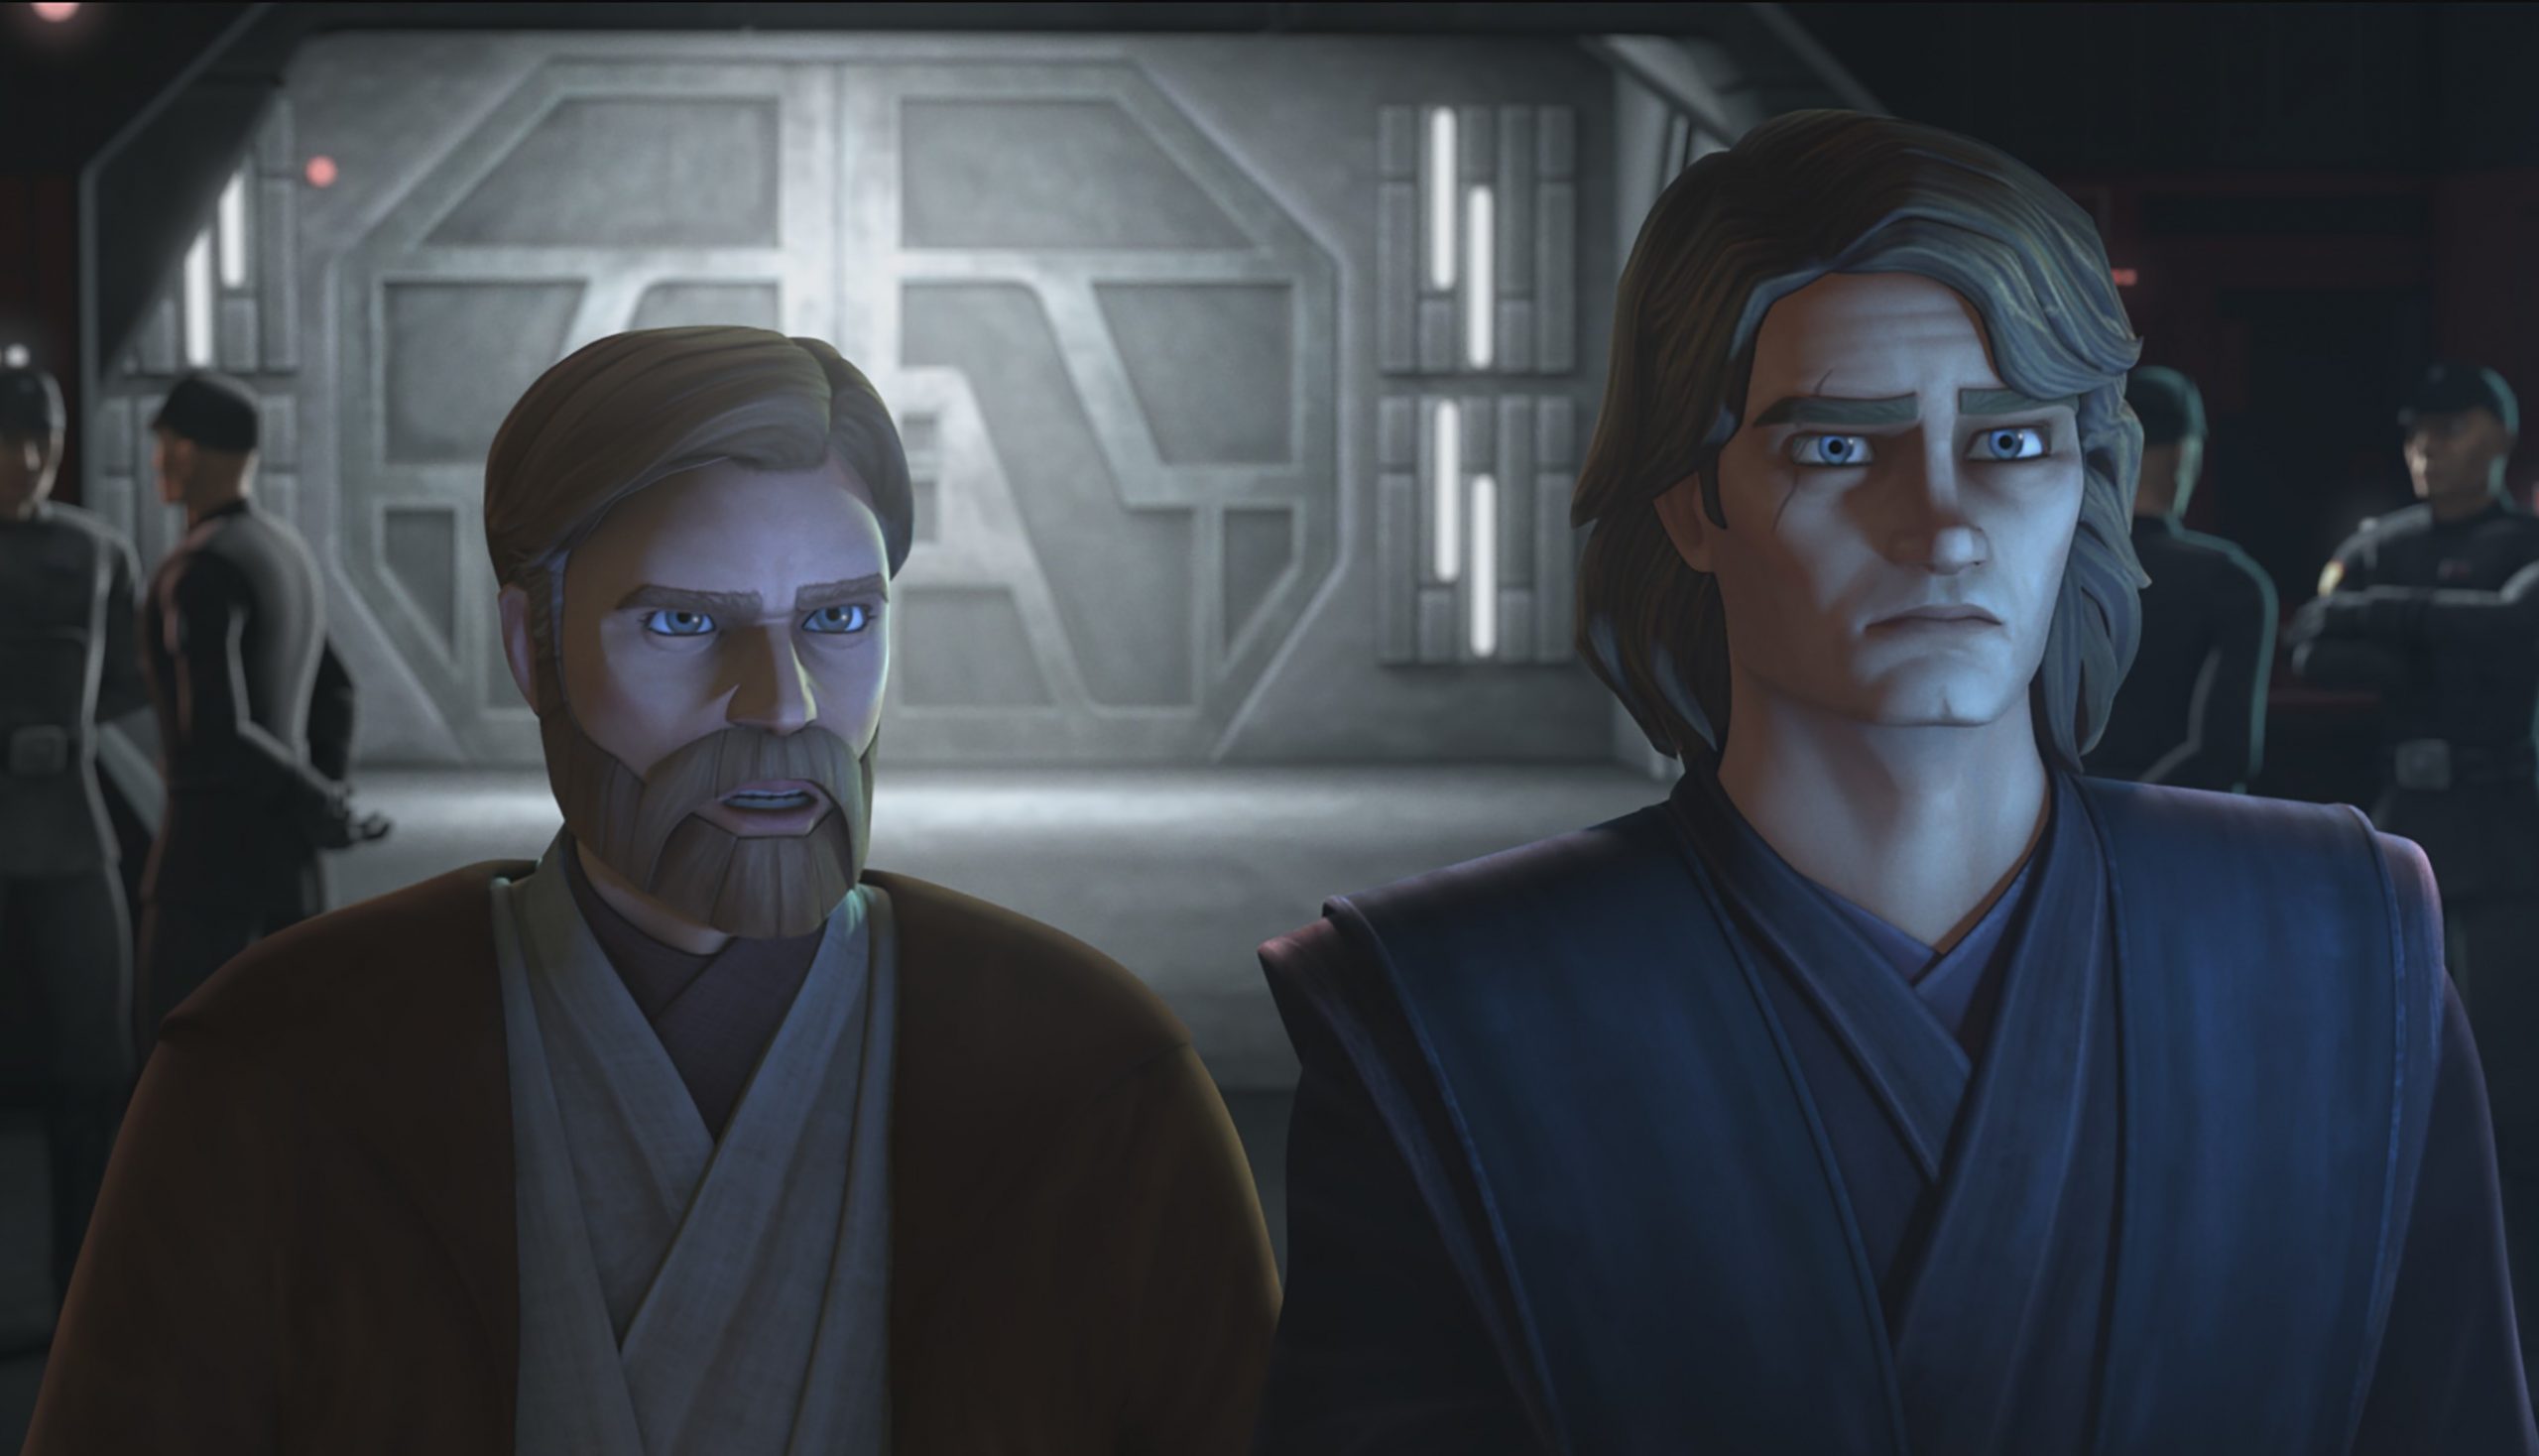 Star Wars: The Clone Wars S07 E10: When and Where to Watch?